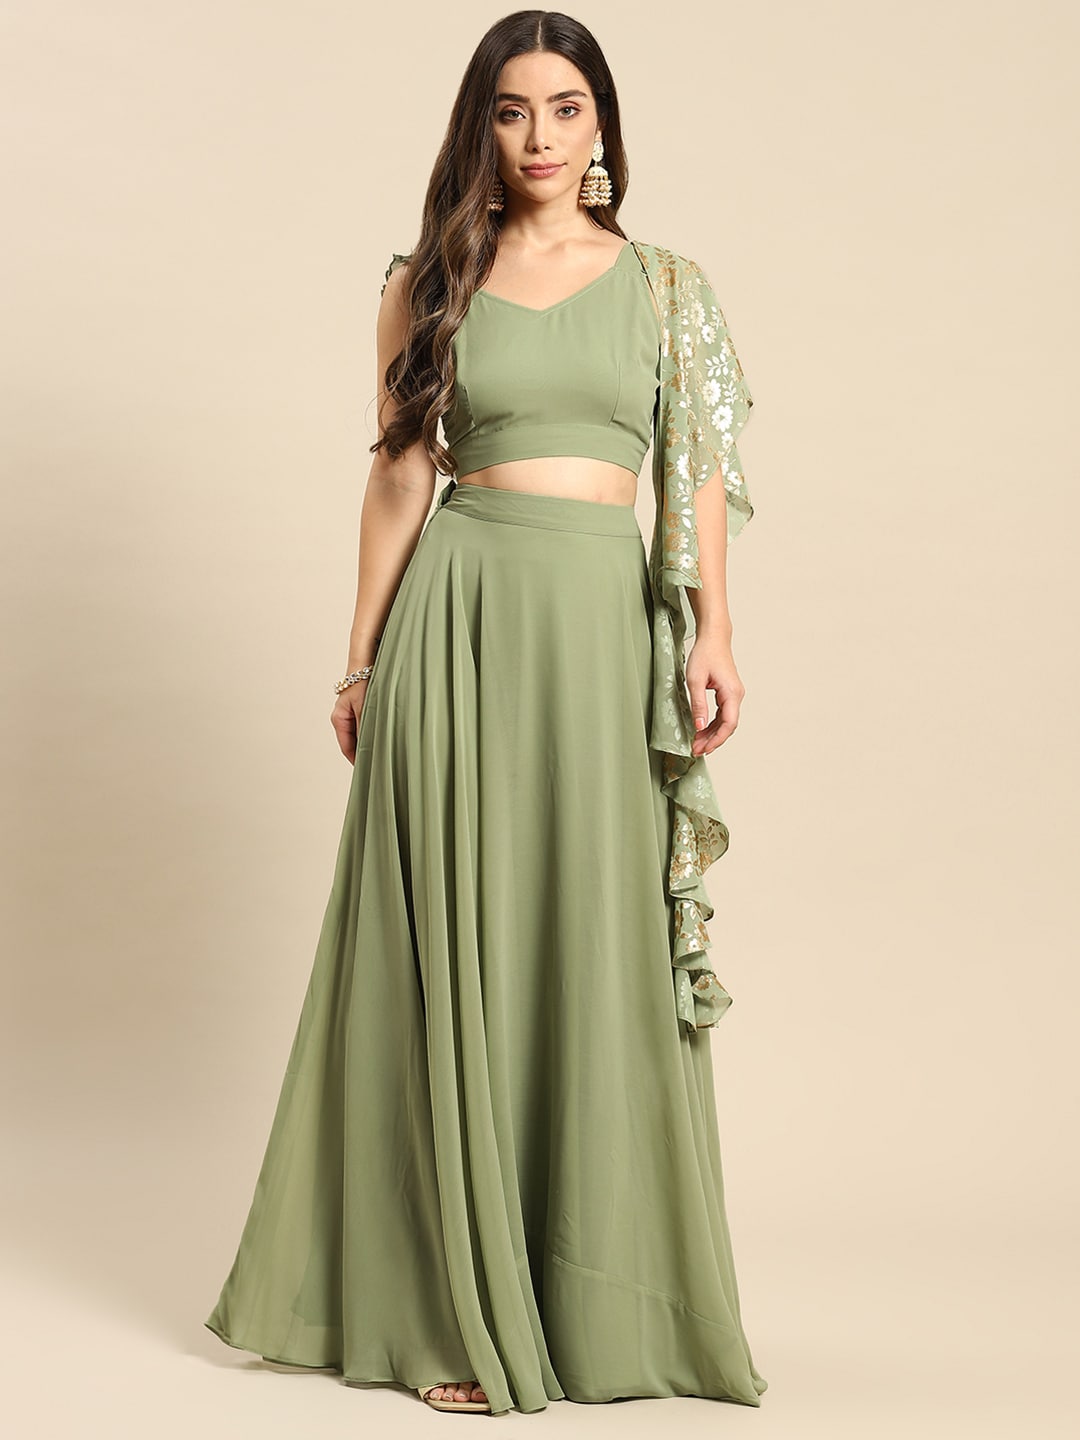 MABISH by Sonal Jain Olive Green Ready to Wear Lehenga & Blouse With Dupatta Price in India